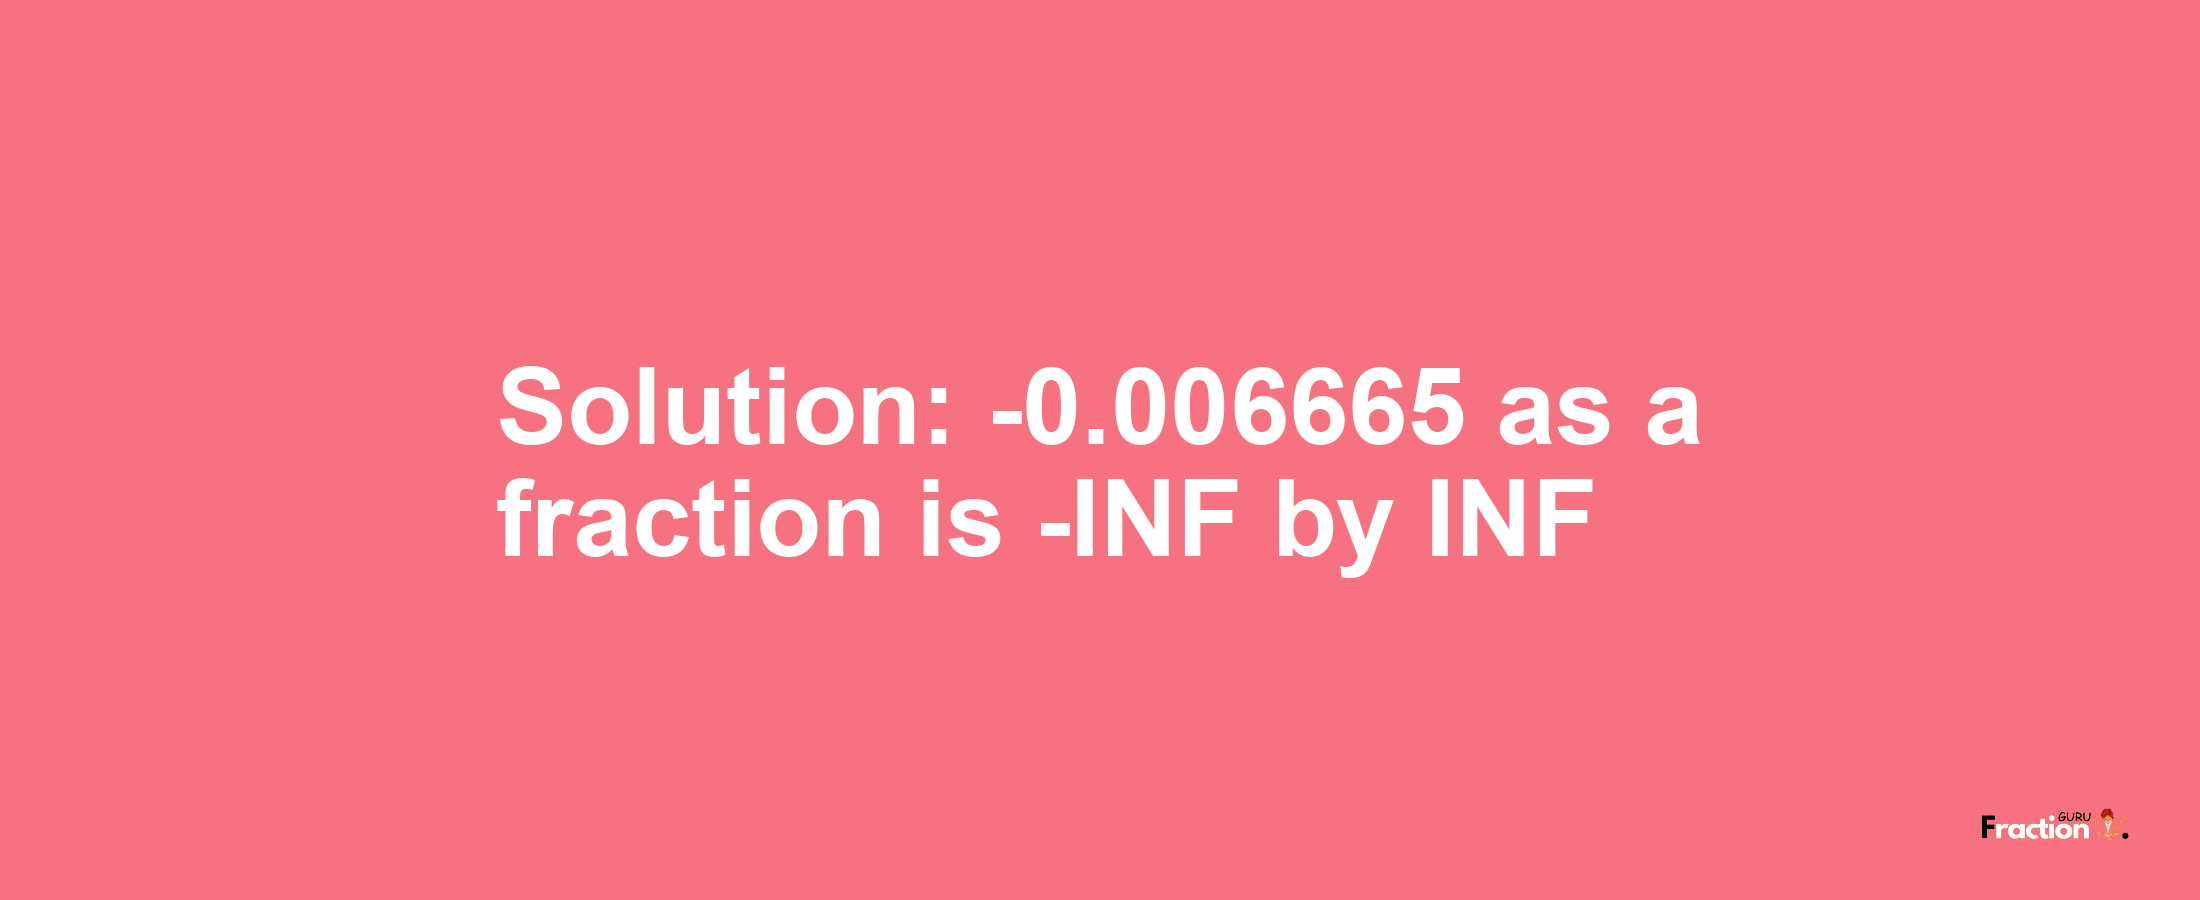 Solution:-0.006665 as a fraction is -INF/INF